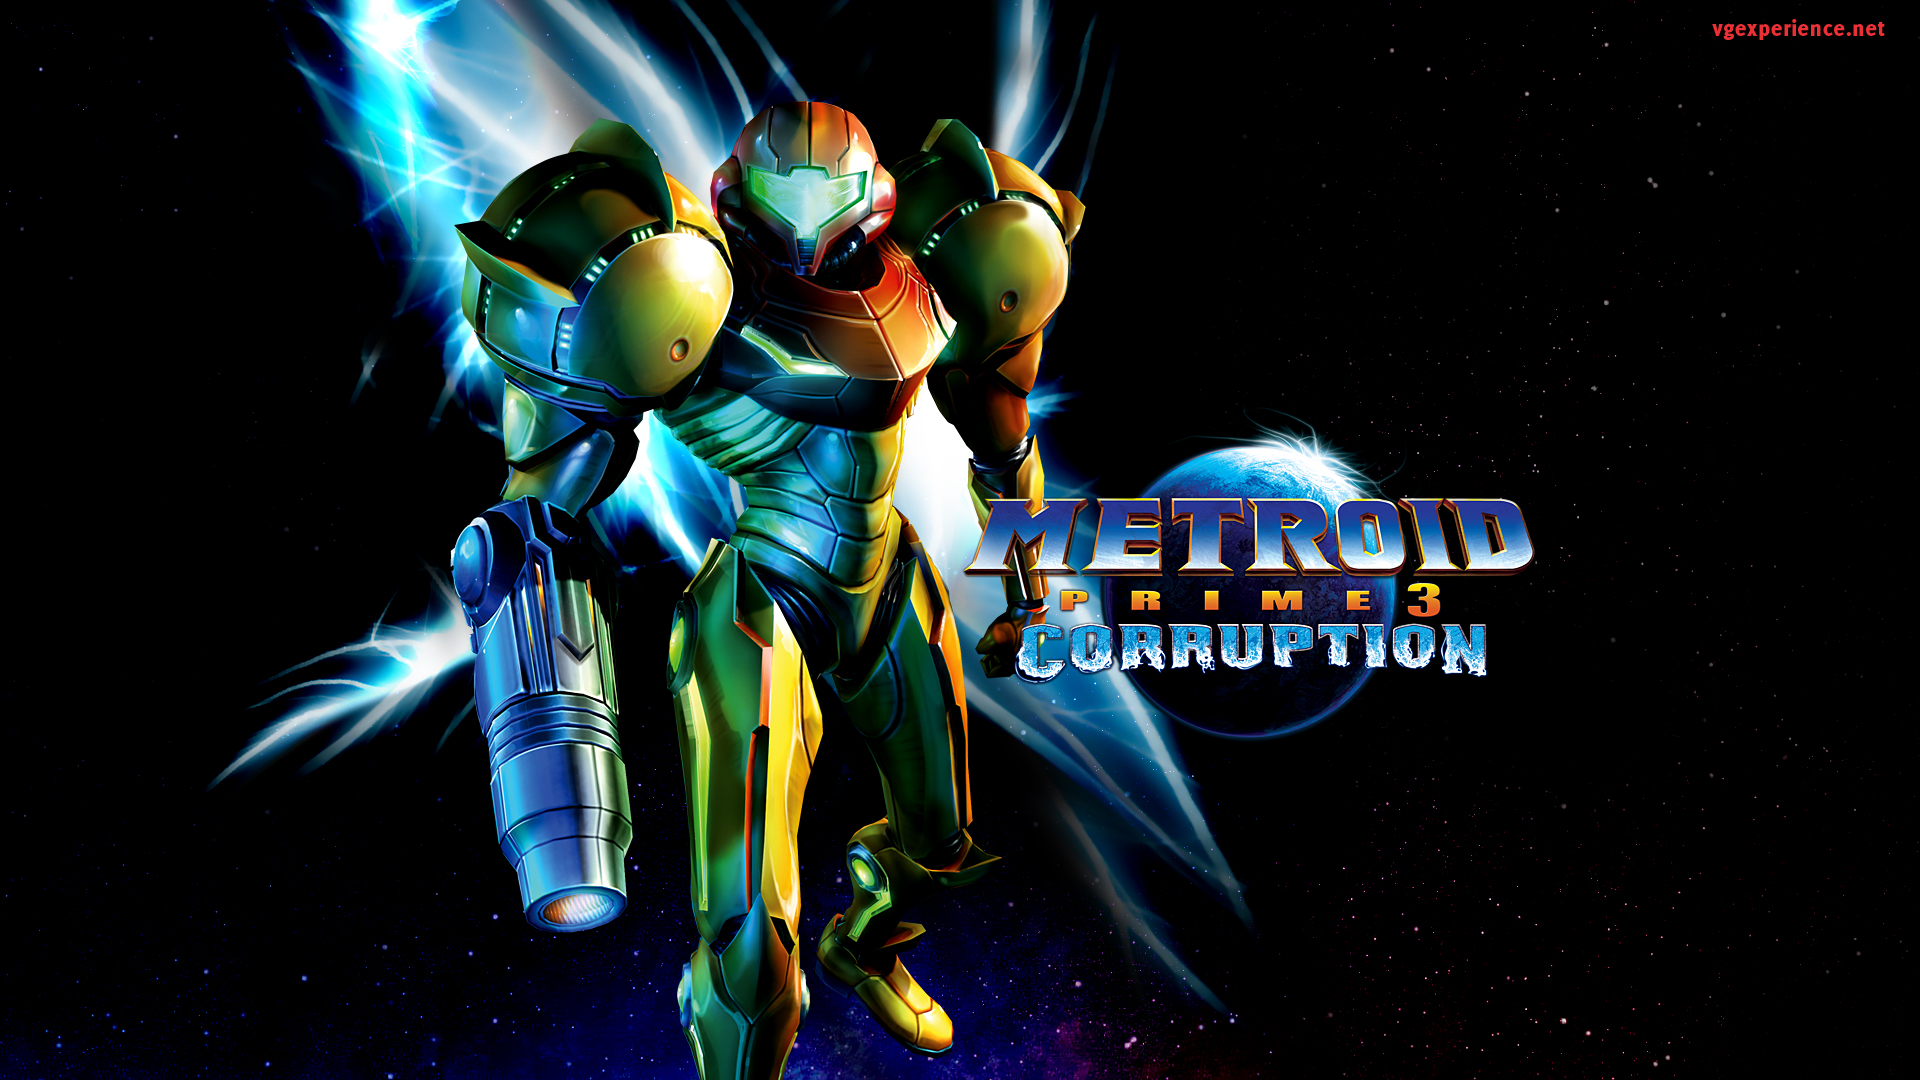 Metroid Prime 3 Corruption Wallpapers Backgrounds